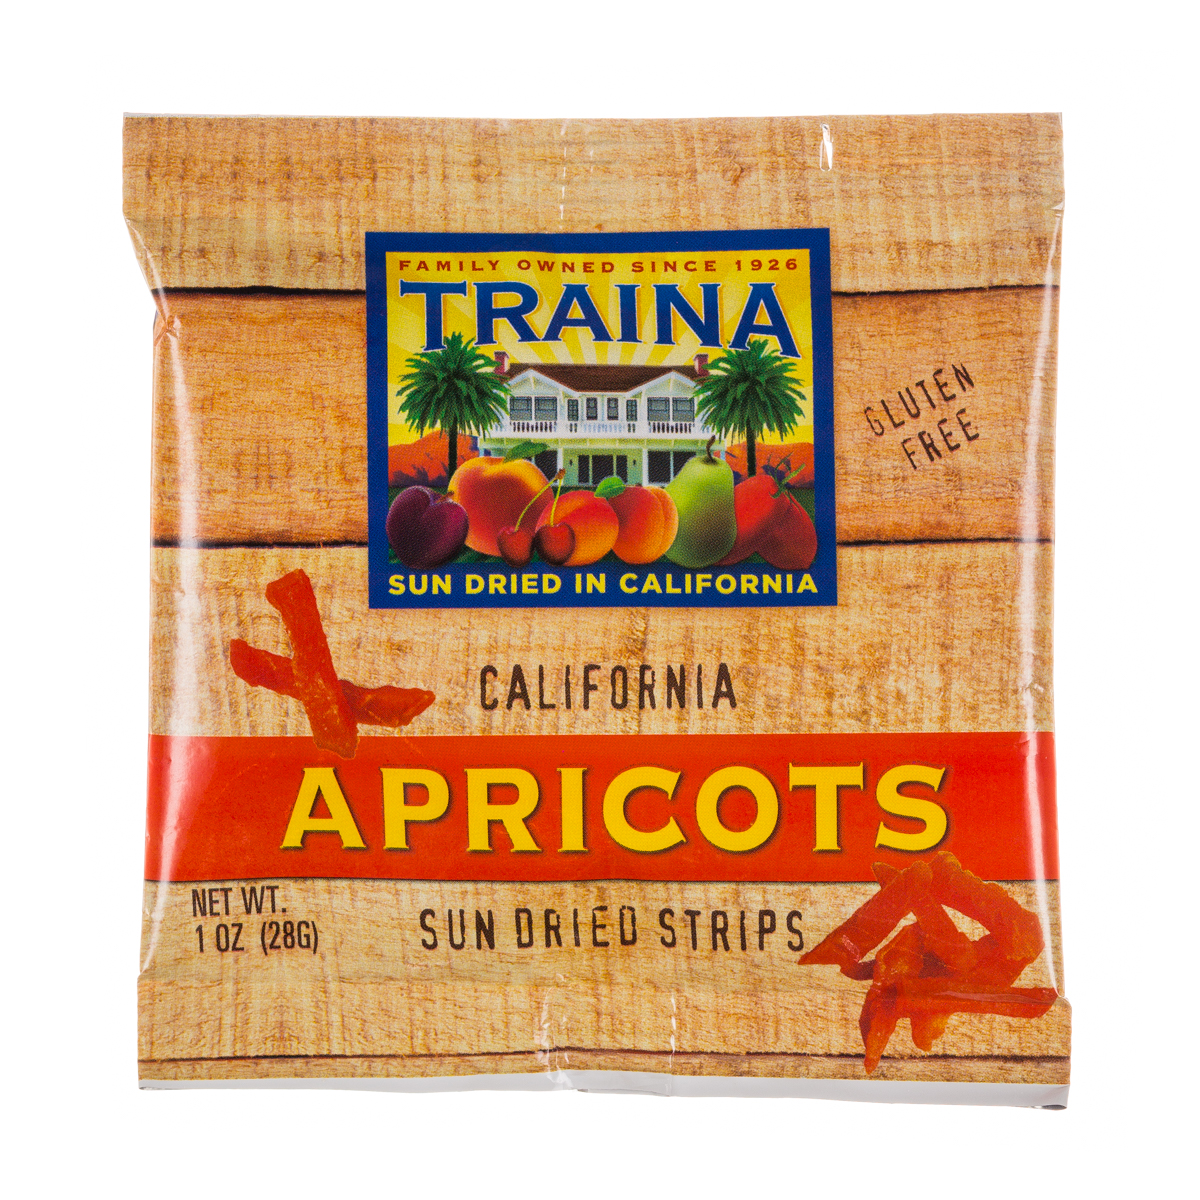 Apricots- sun dried strips